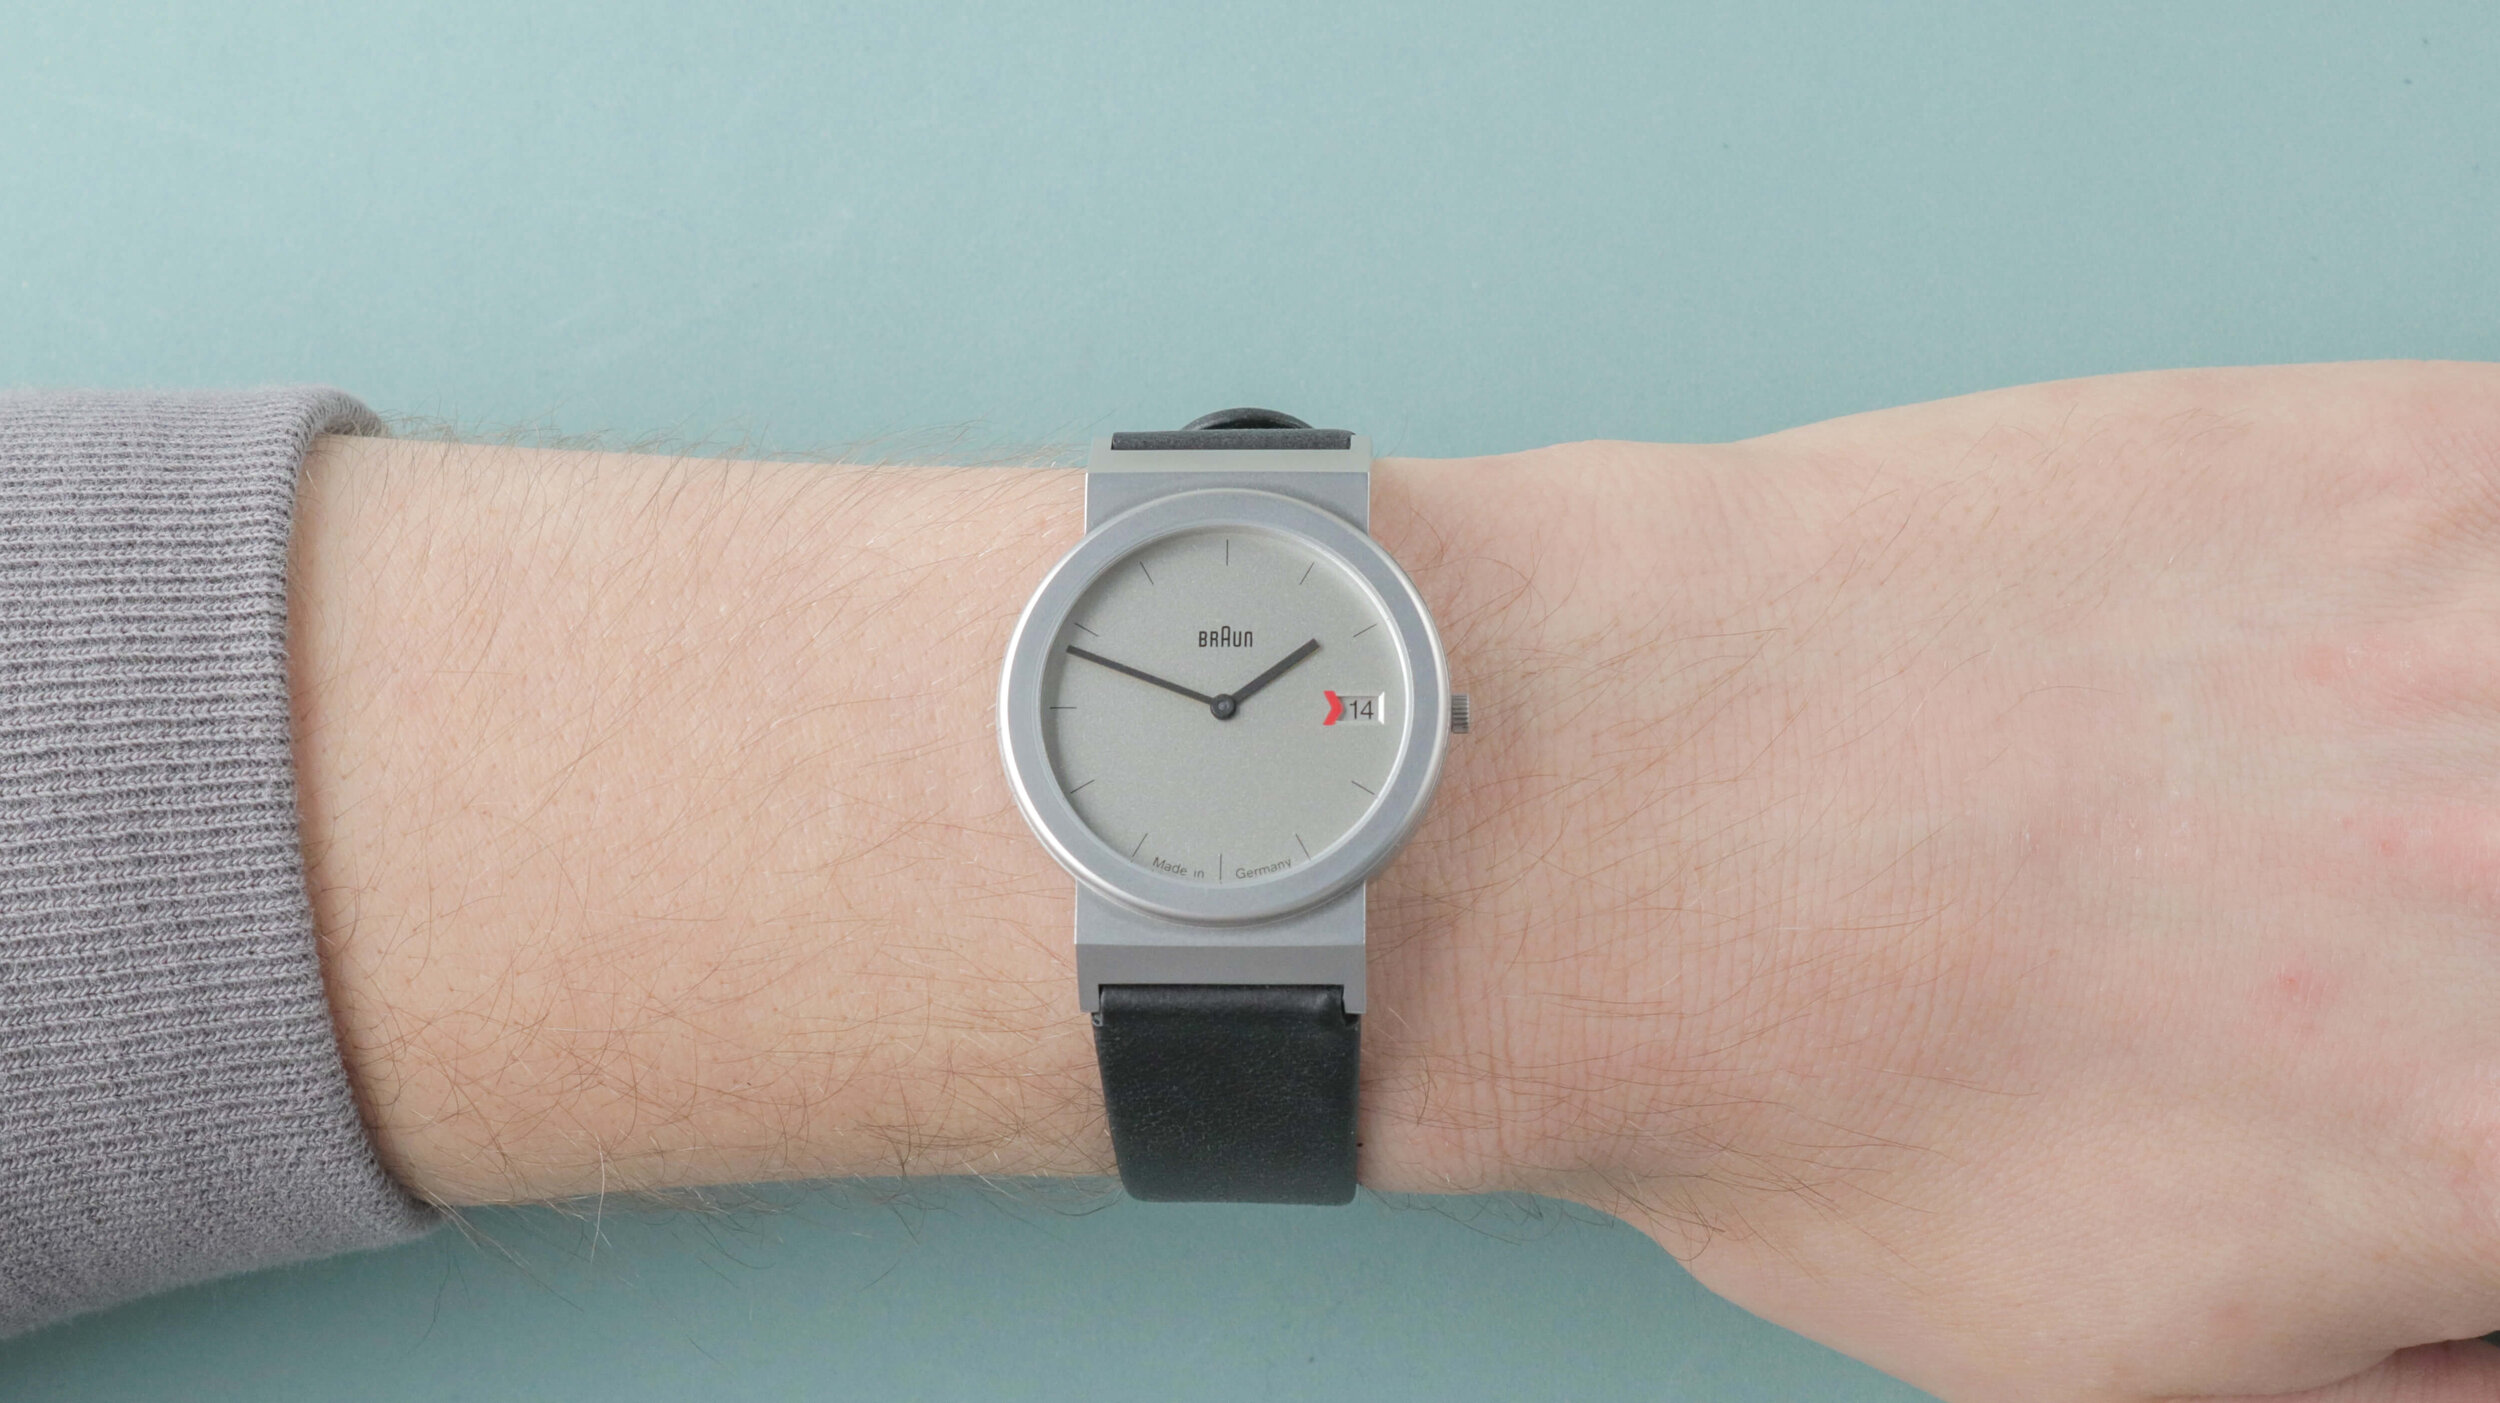 Braun Aw50 Review The Hidden Price Of Minimalism Ben S Watch Club Exploring Affordable Watches